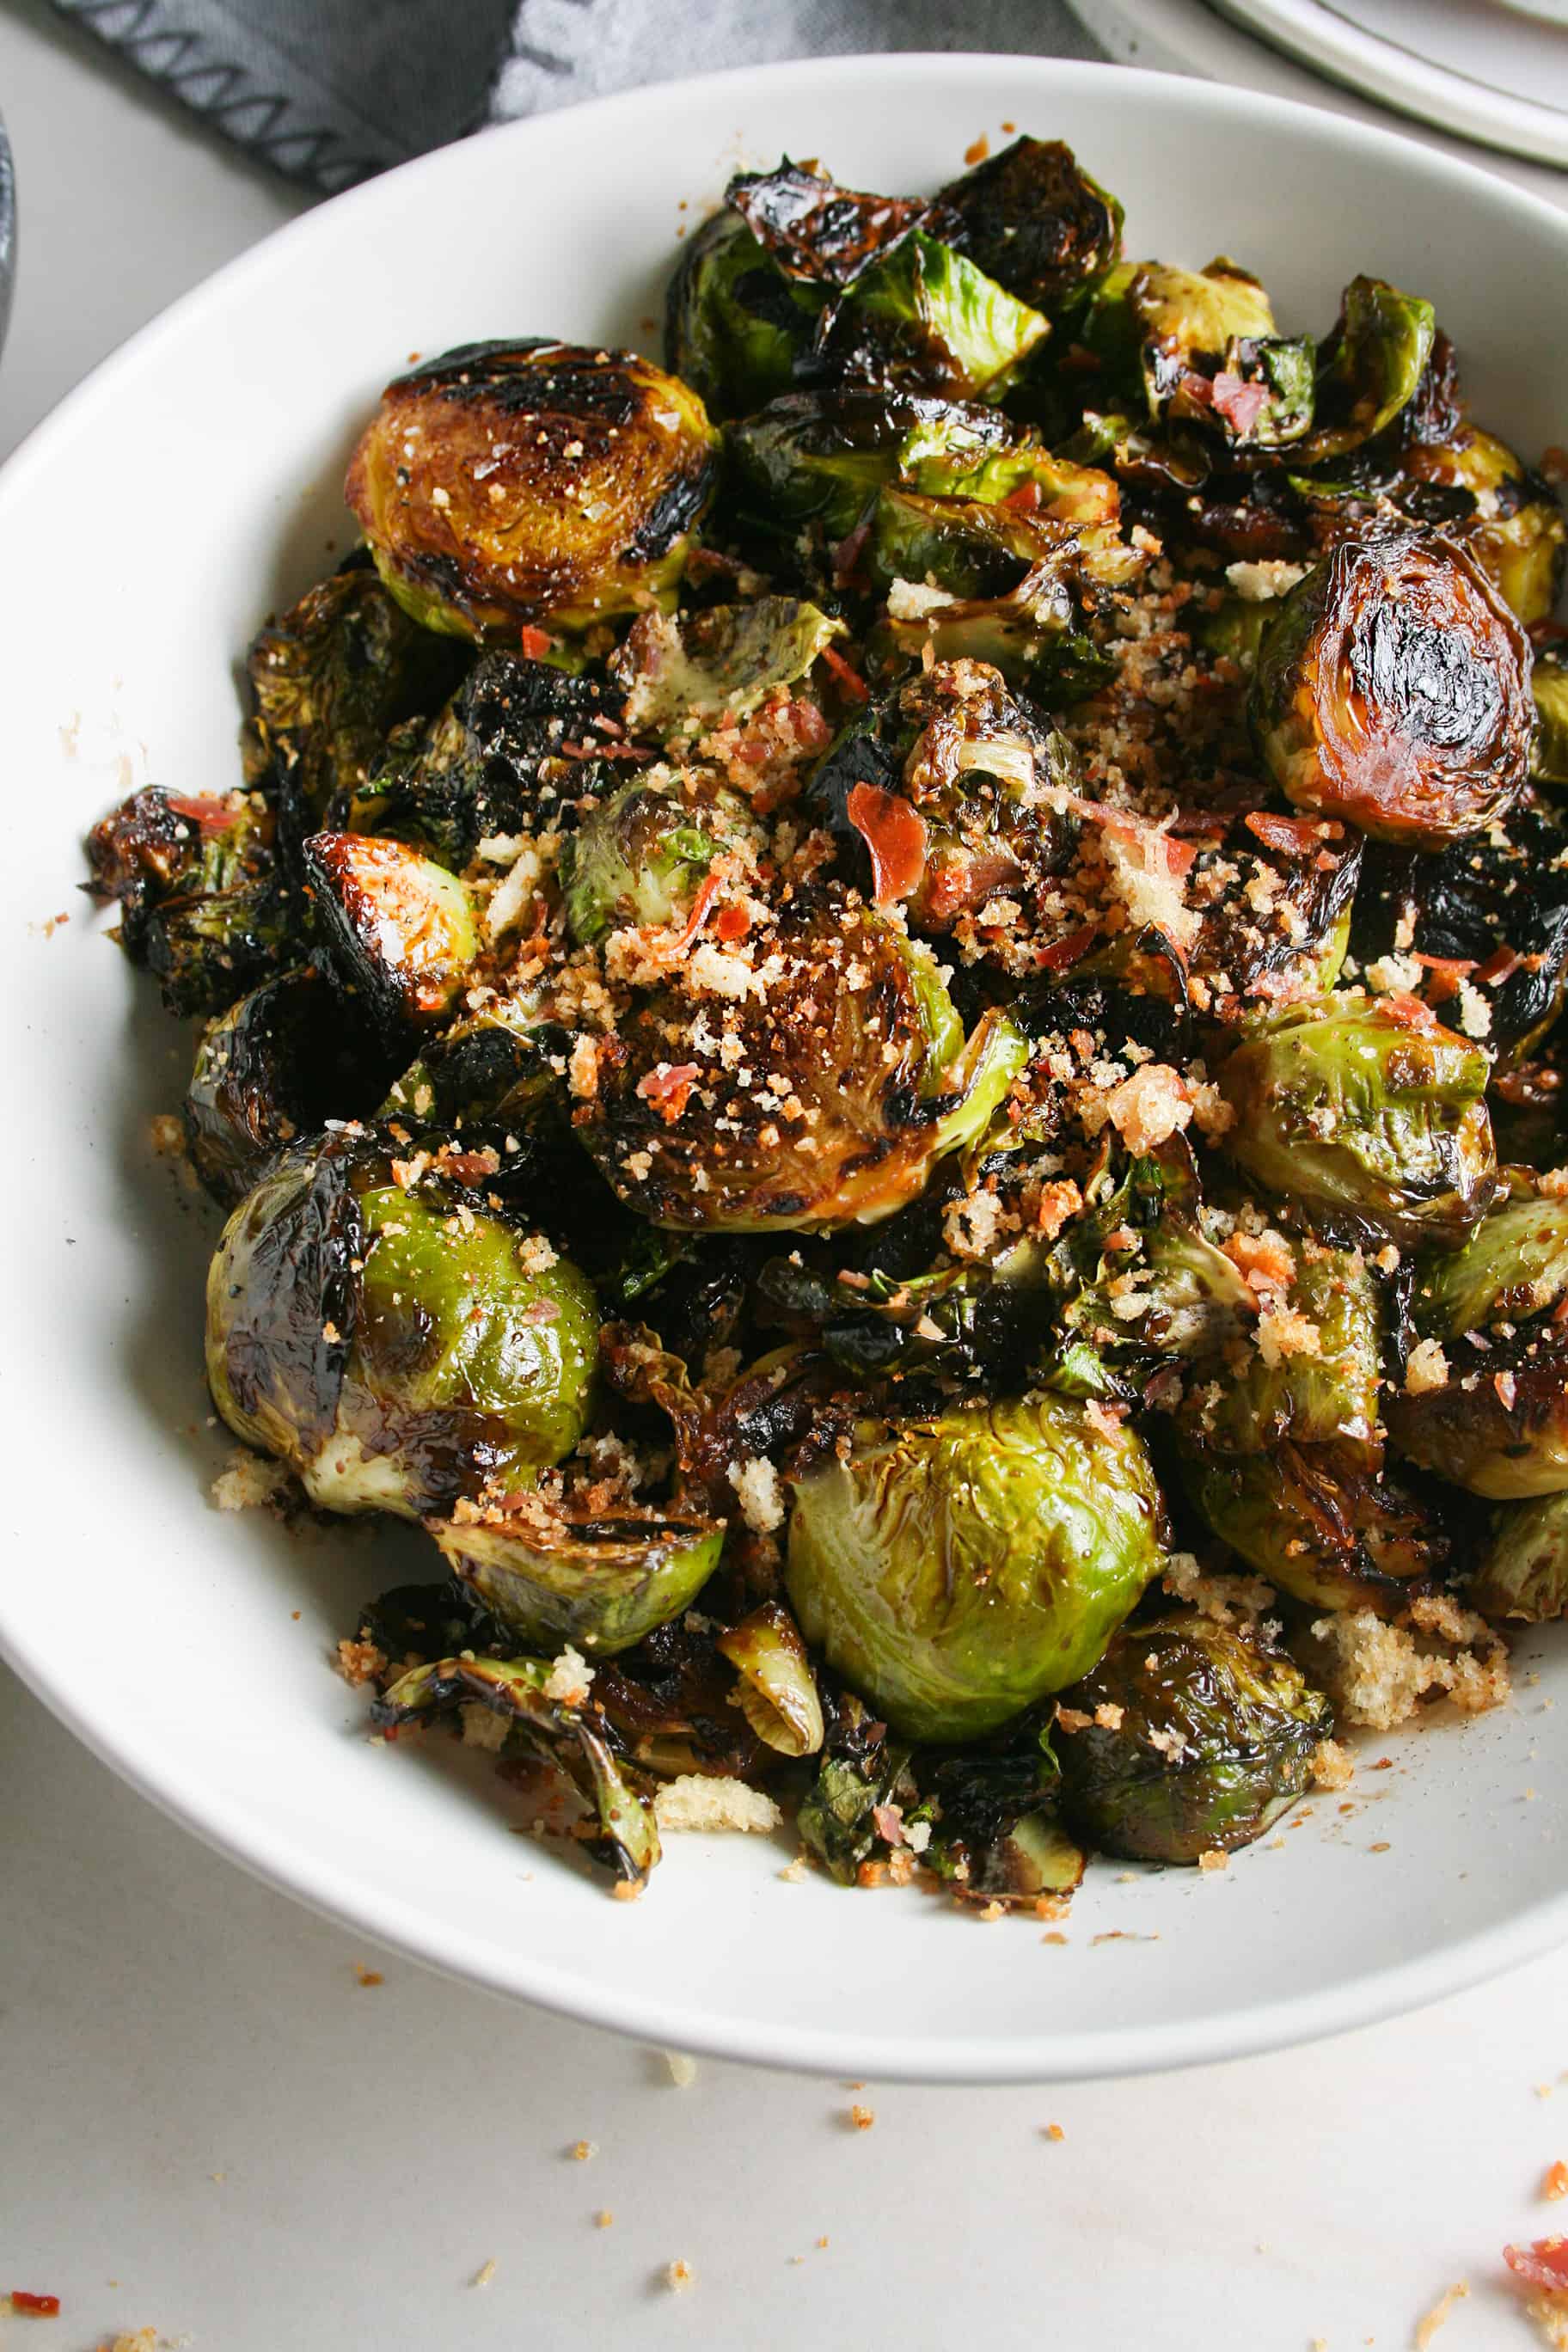 Red Wine Pan Fried Brussels sprouts photographed in a white shallow bowl